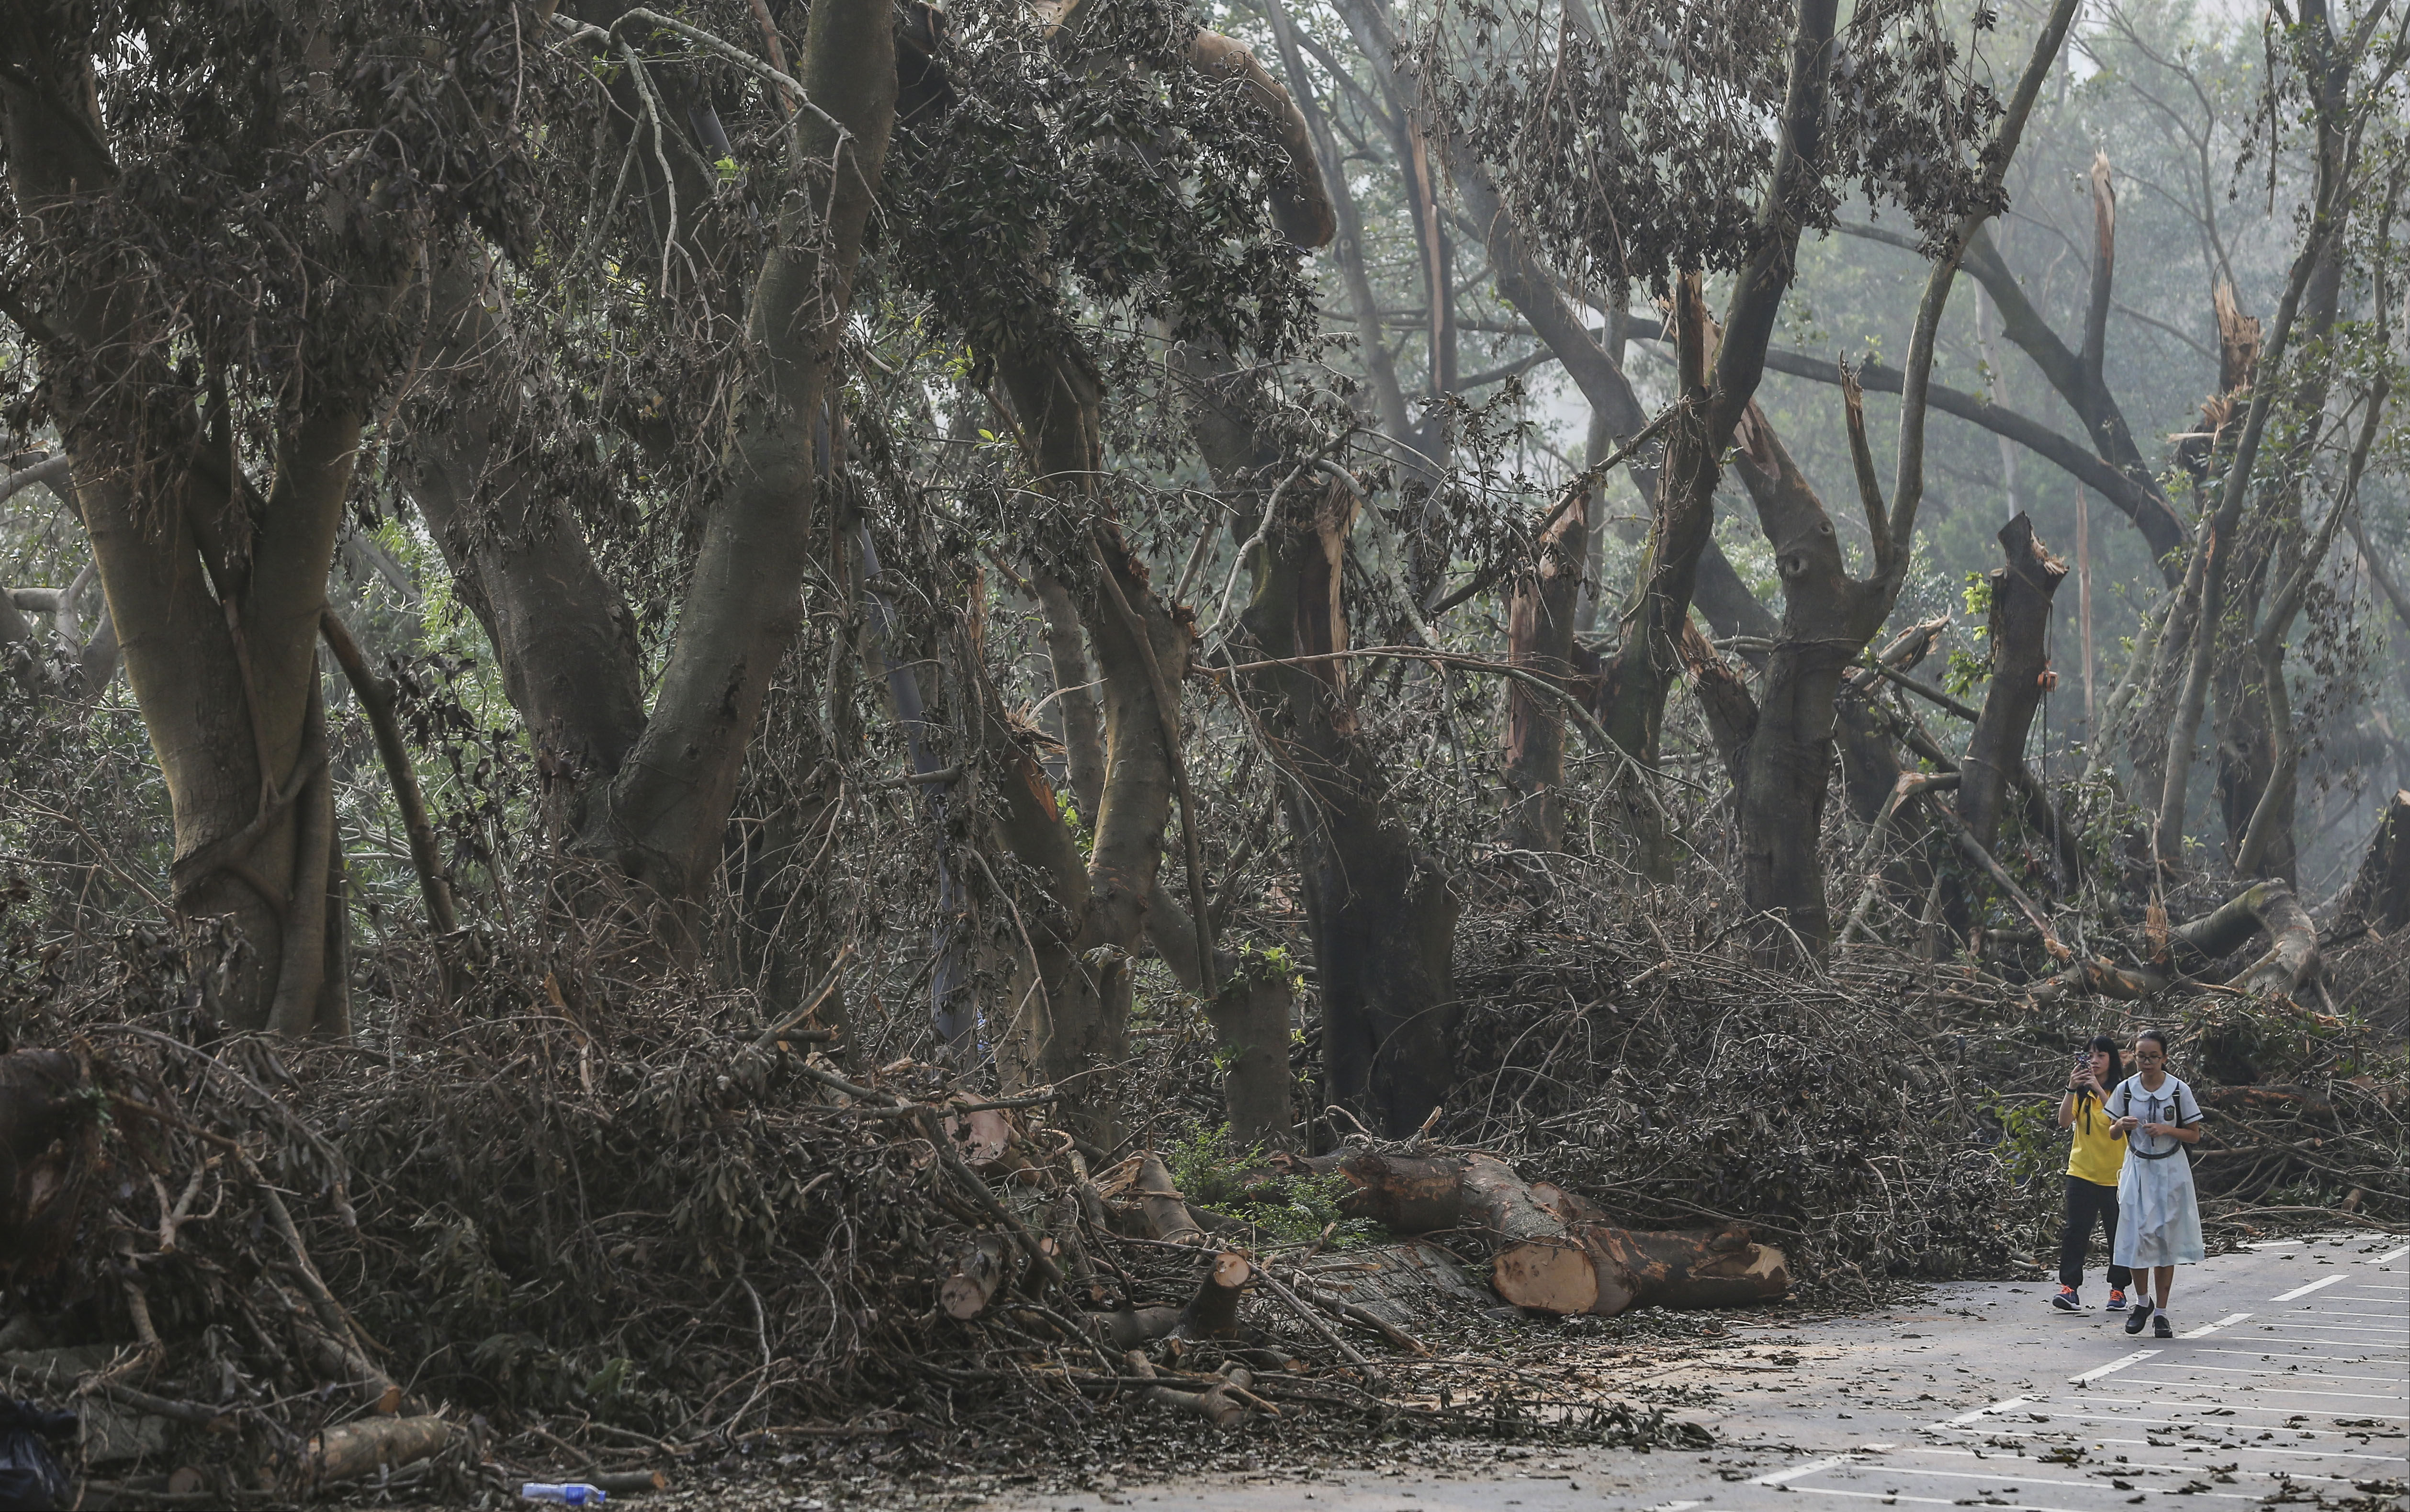 Students walk past damaged trees in Sheung Shui after Typhoon Mangkhut hit Hong Kong on September 16, 2018. Extreme weather events are one of the consequences of climate change. Photo: Sam Tsang